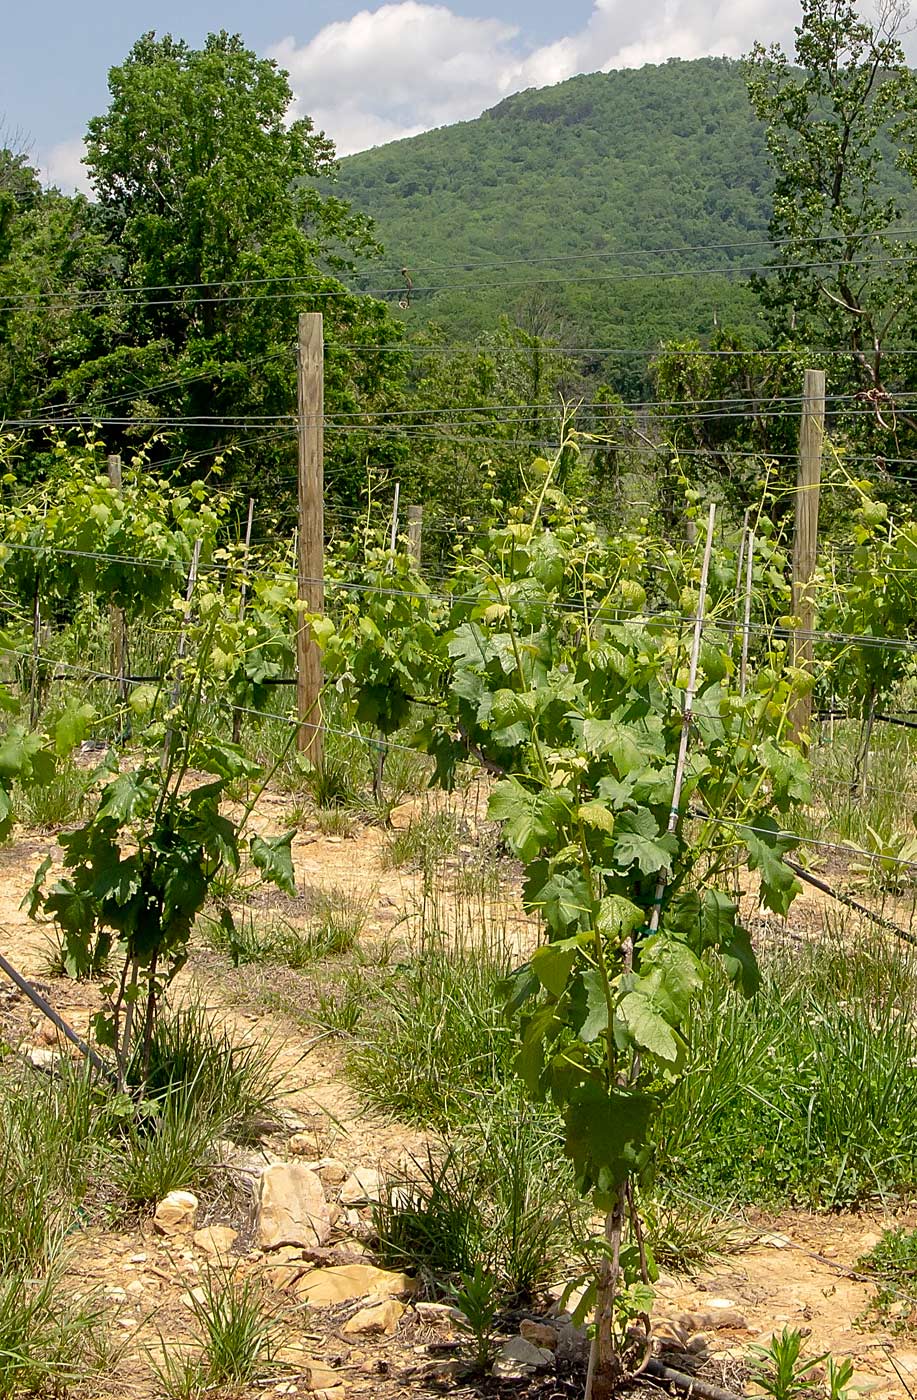 The rocky, well drained soil on this hill top at Brown Bear Vineyards, in contrast to the clay soils found in most of Virginia, make it an ideal site for premium grapes, such as this Petit Verdot block. (Kate Prengaman/Good Fruit Grower)